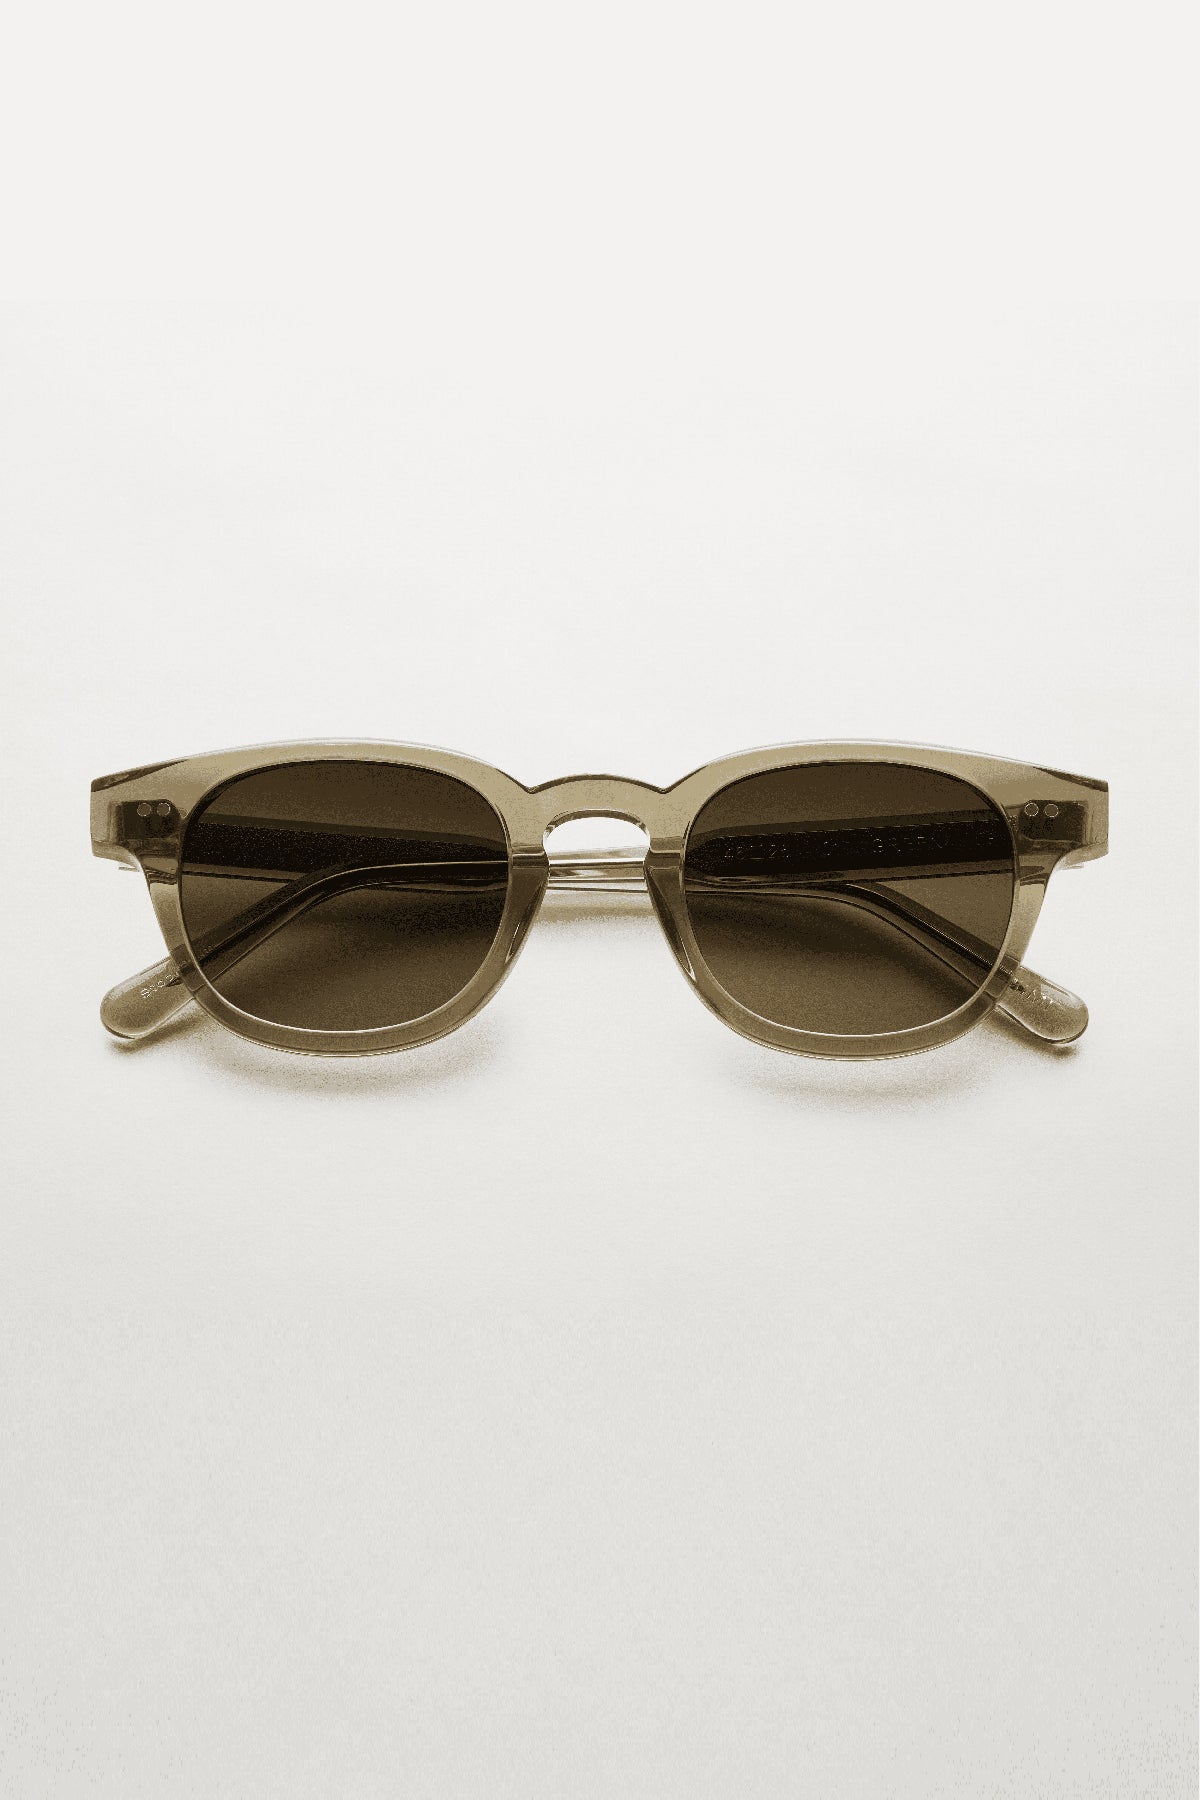 01 SUNGLASSES BY CHIMI by Spencer